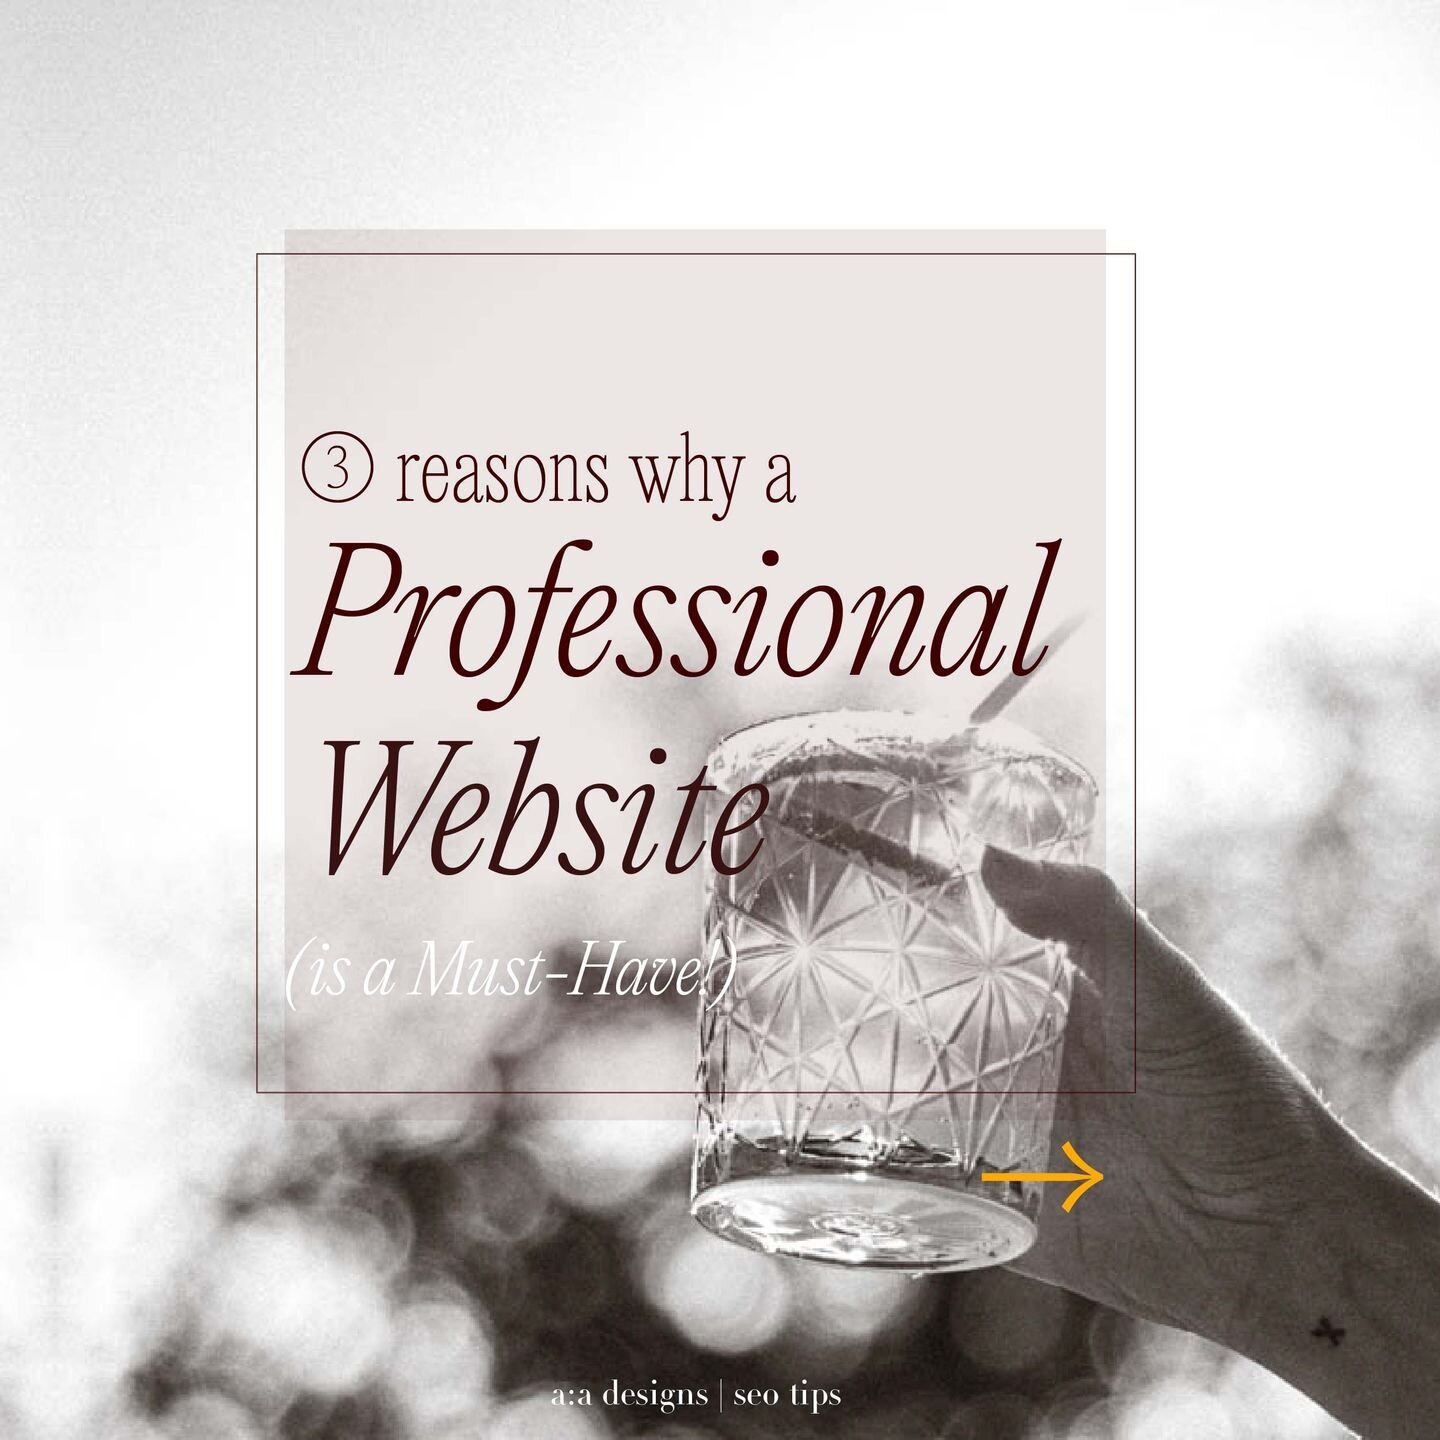 If you're serious about taking your business to the next level, having a professional-looking website is essential. 

Here are 🛠 3 reasons why you need one - but that's just the tip of the iceberg! 

For a more in-depth analysis and actionable point